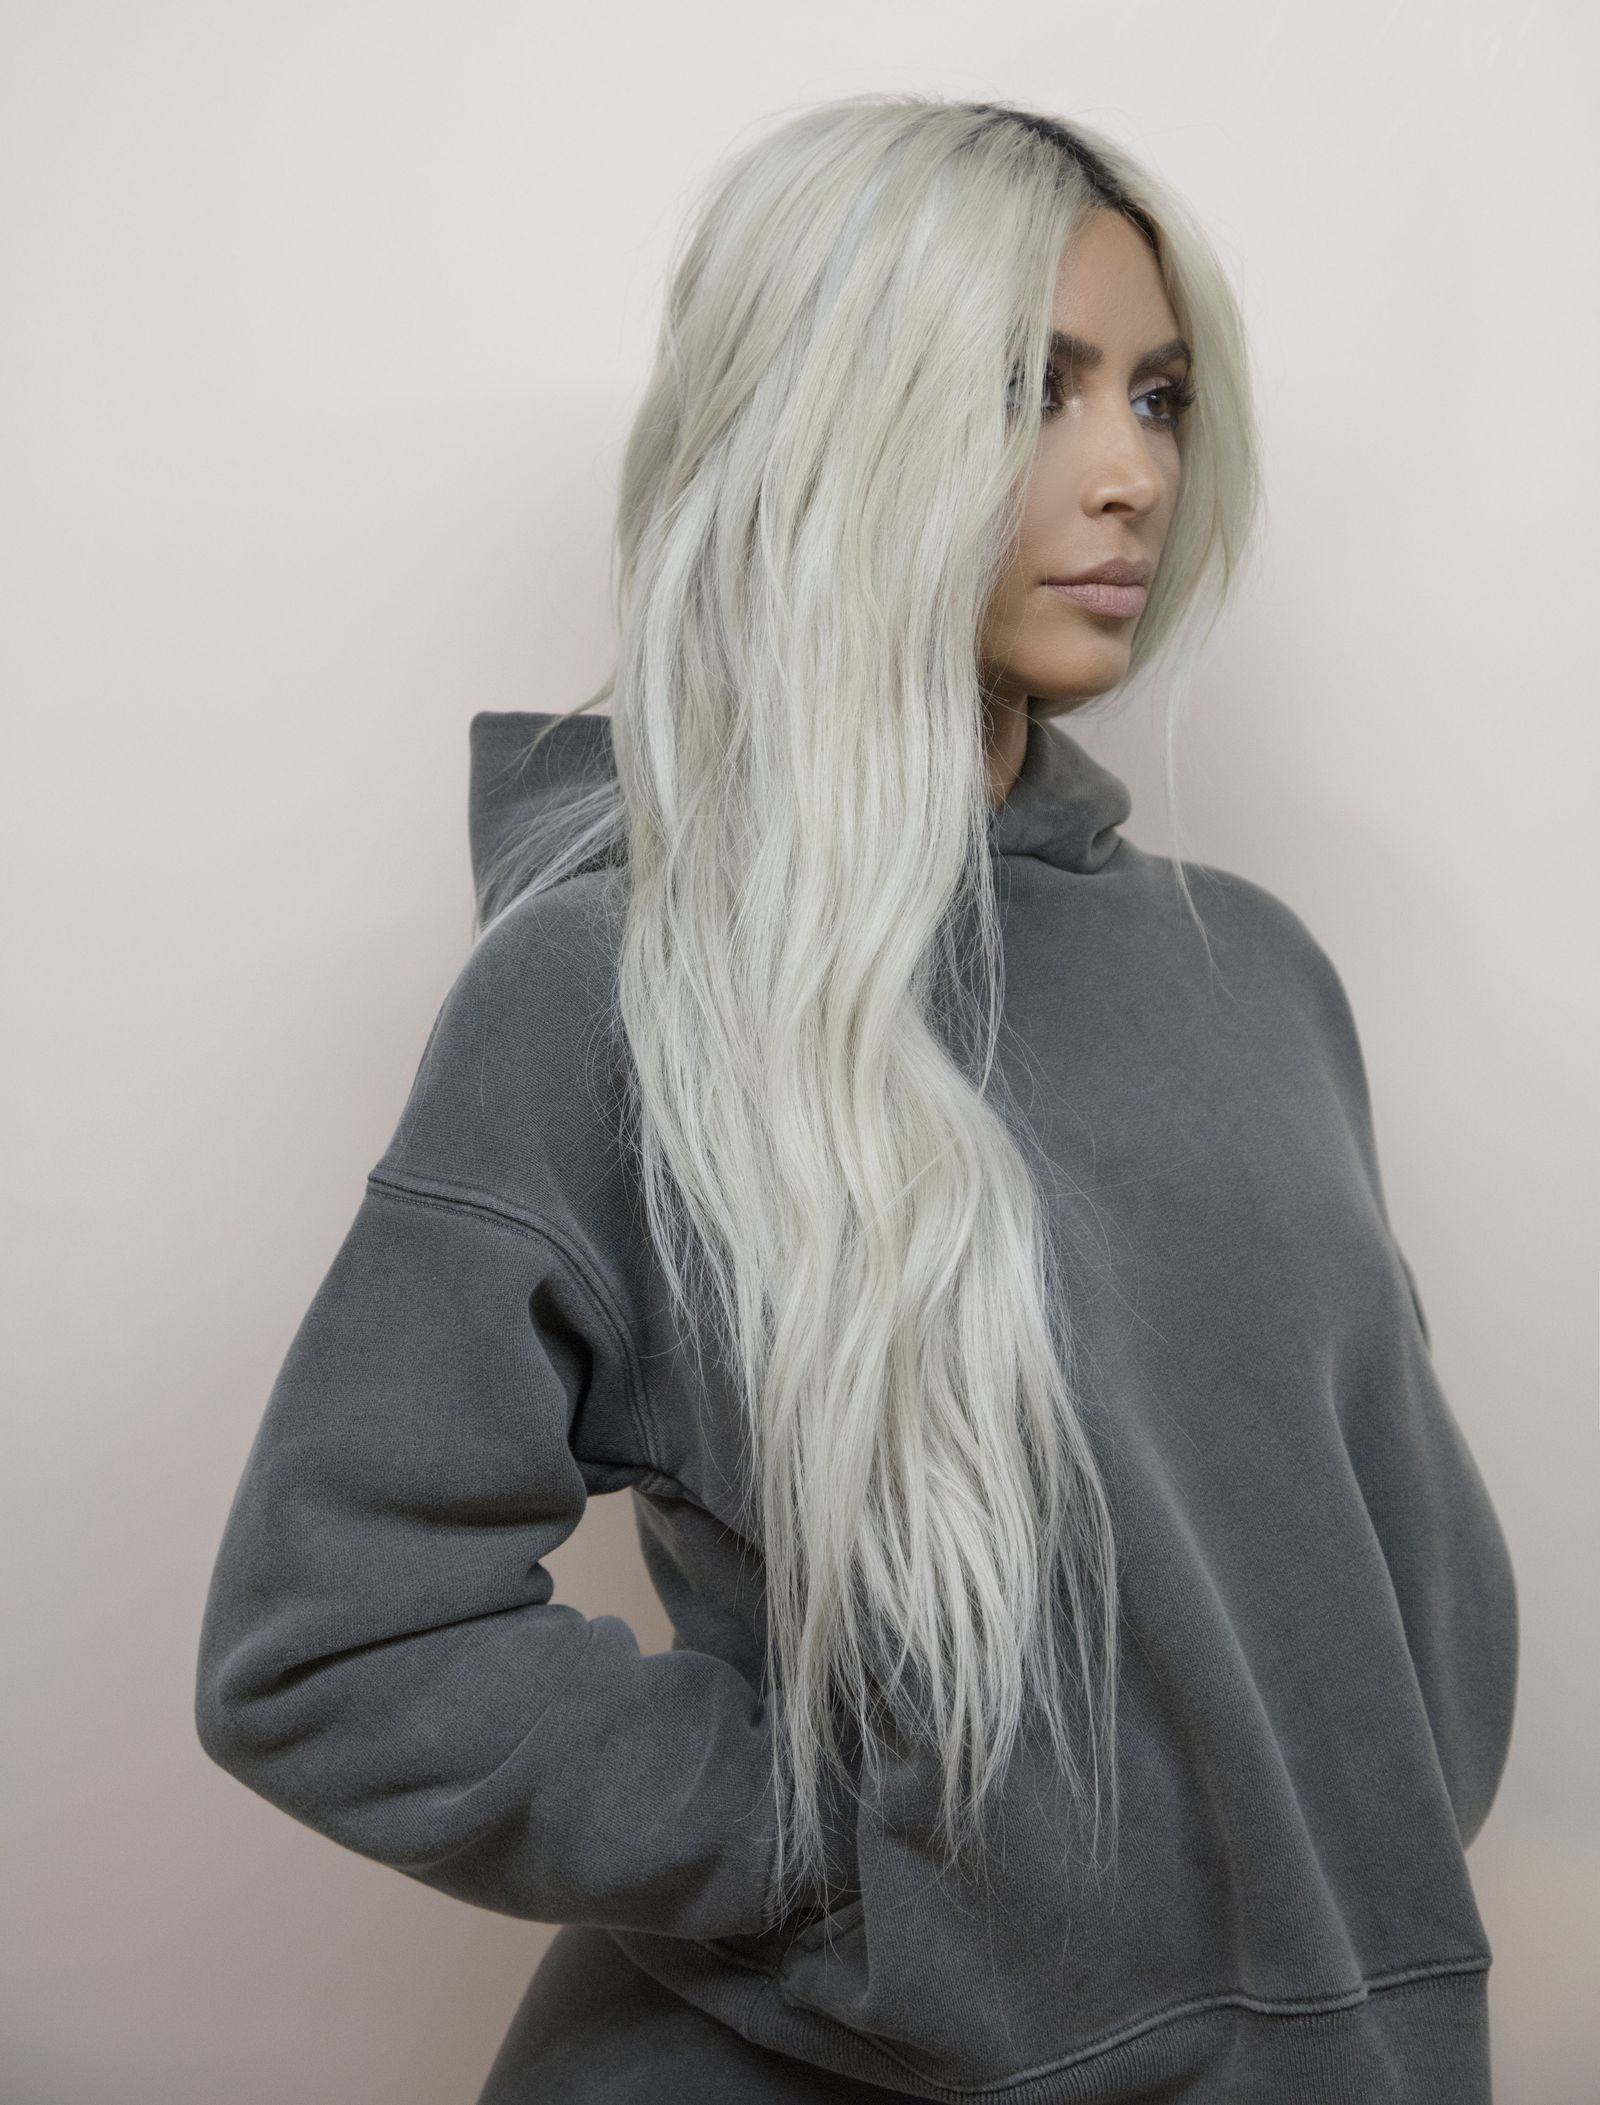 CR Exclusive Unseen Images of Kim Kardashian by Jackie Nickerson from Yeezy Season 6